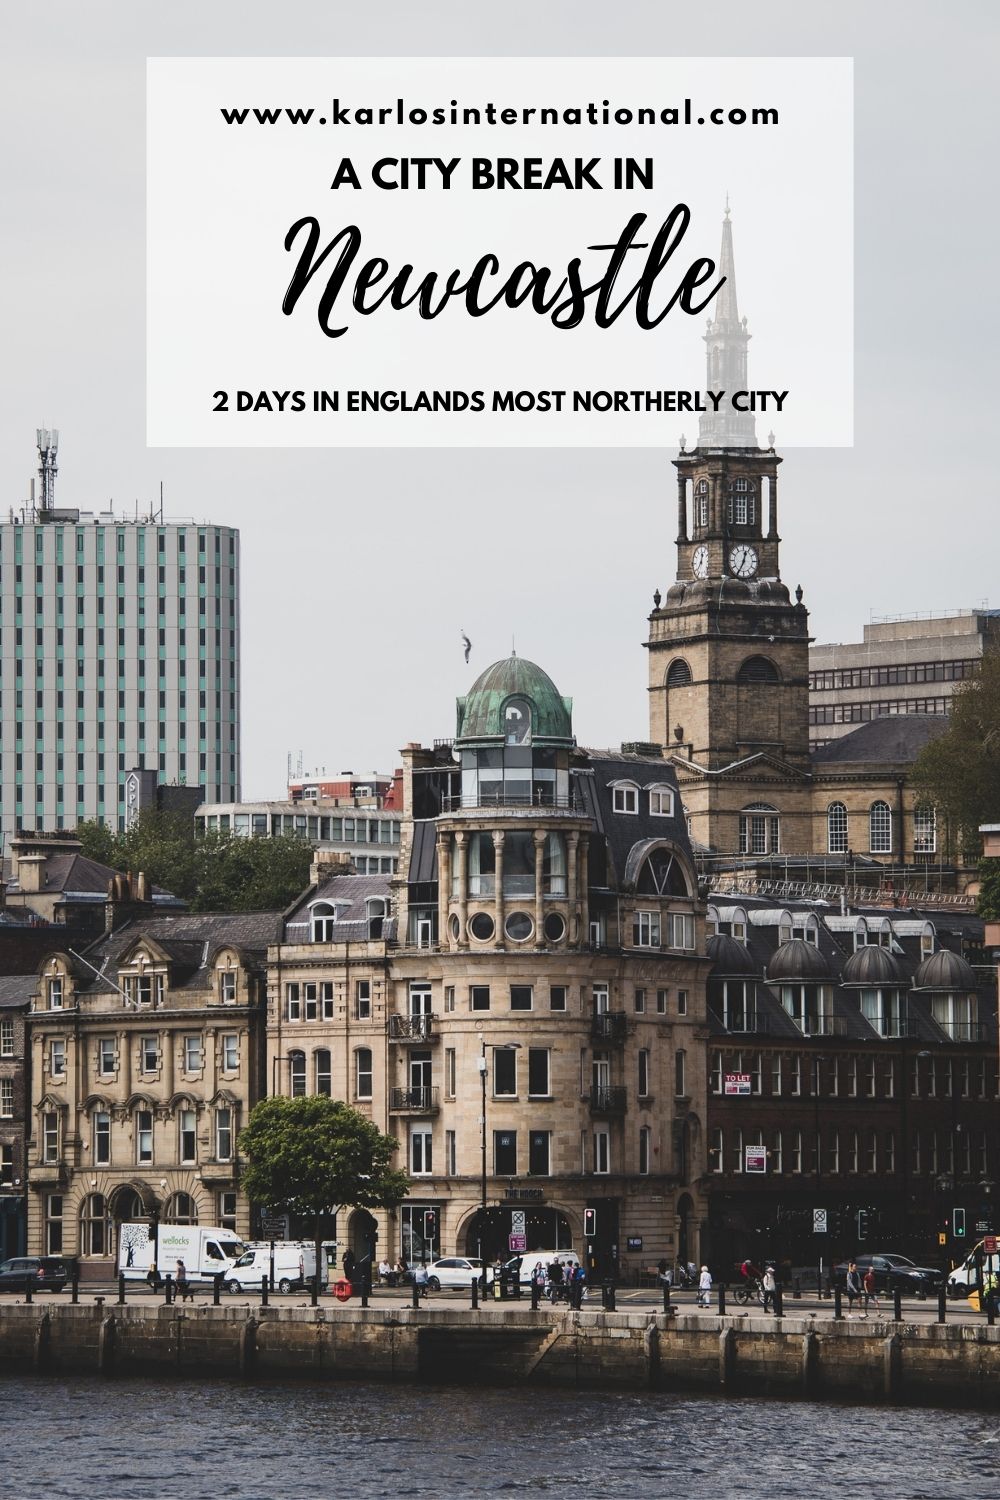 A Newcastle City Break - A 2 day Itinerary for Newcastle